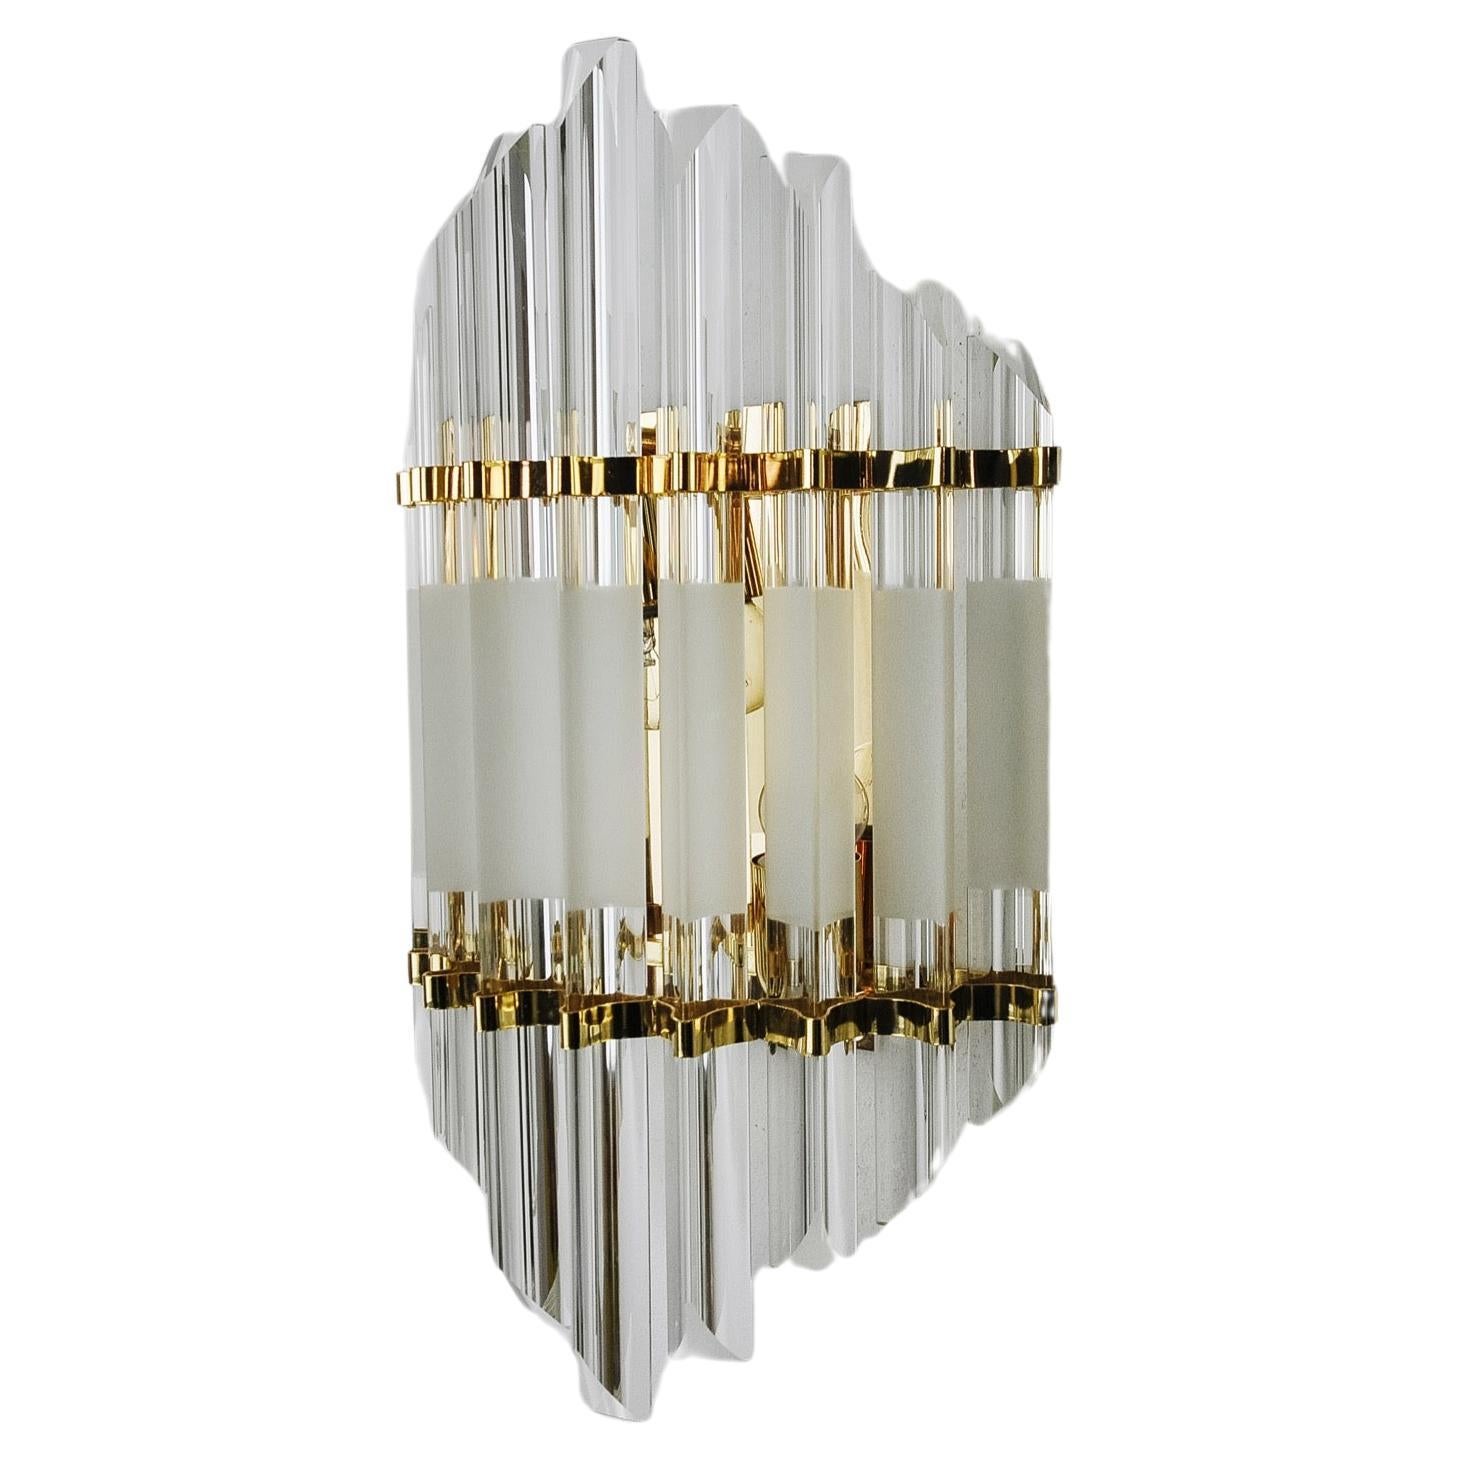 Very beautiful and large Venini wall lamp produced in Italy in the 70s. Tridii crystals supported by a golden metal structure. Unique object that will illuminate wonderfully and bring a real designer touch to your interior. Electricity checked, time